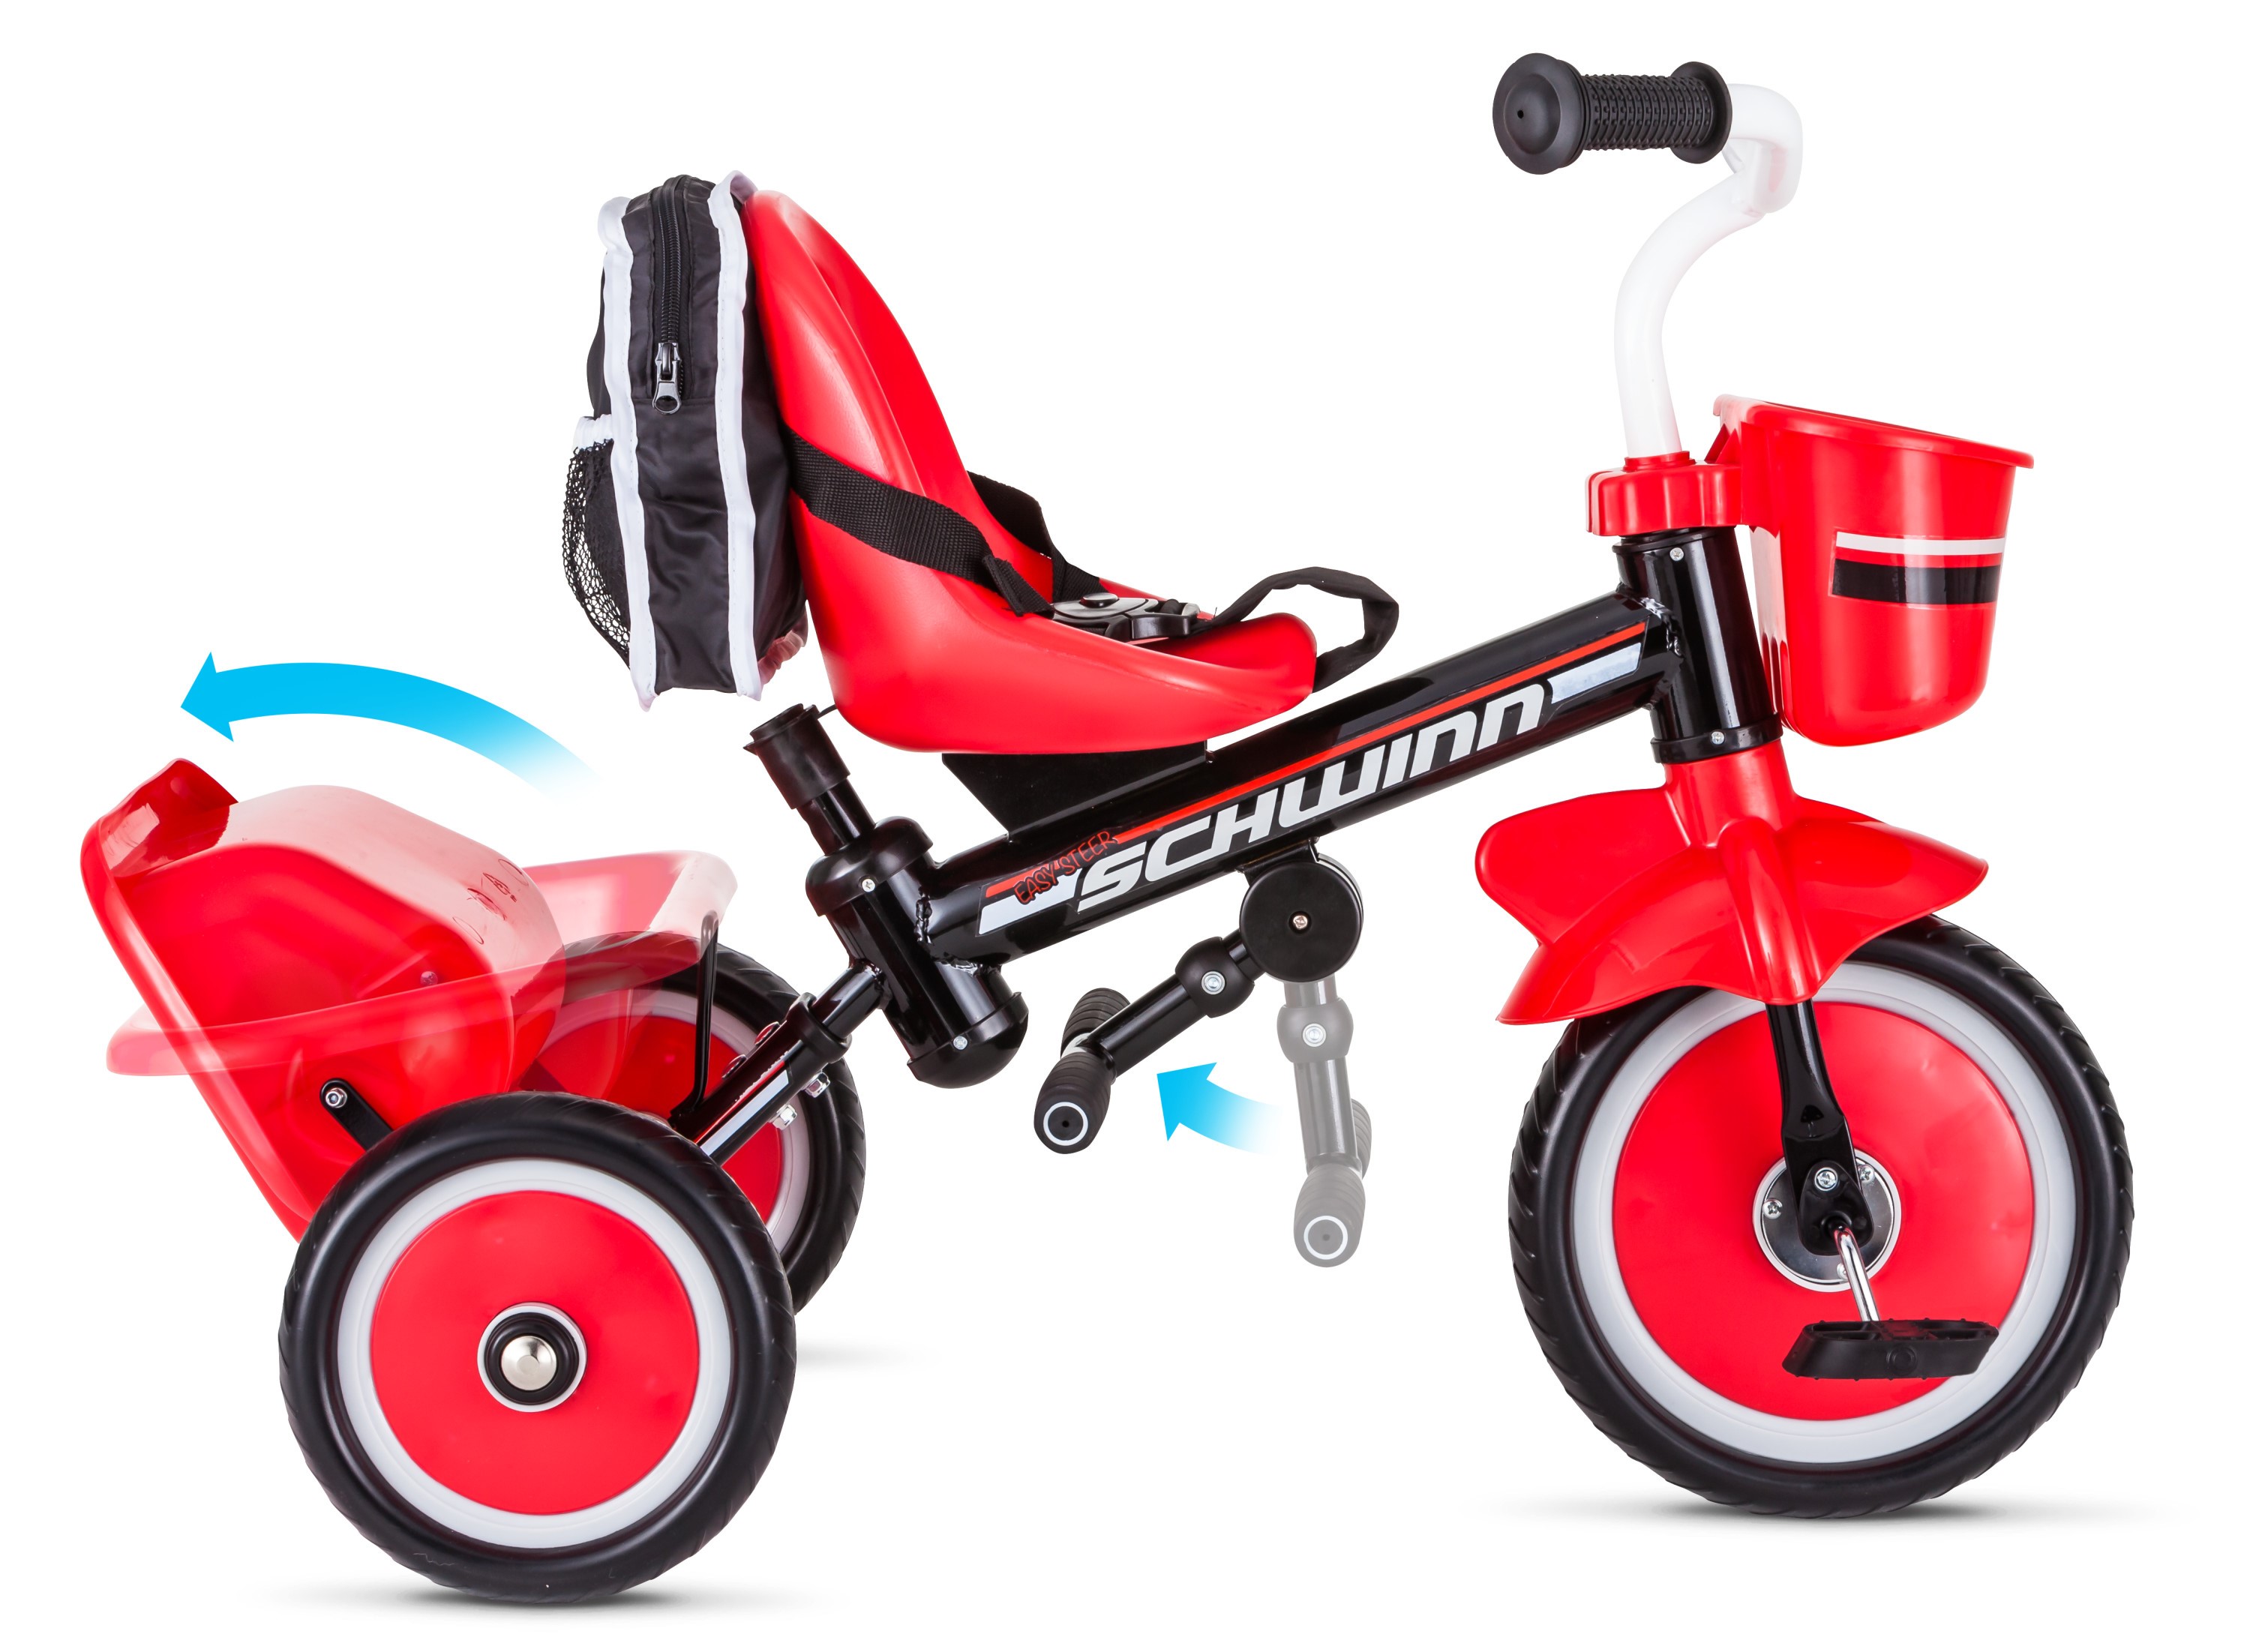 Schwinn Easy-Steer Tricycle with Push/Steer Handle, ages 2 - 4, red & white, toddler bike - image 4 of 9